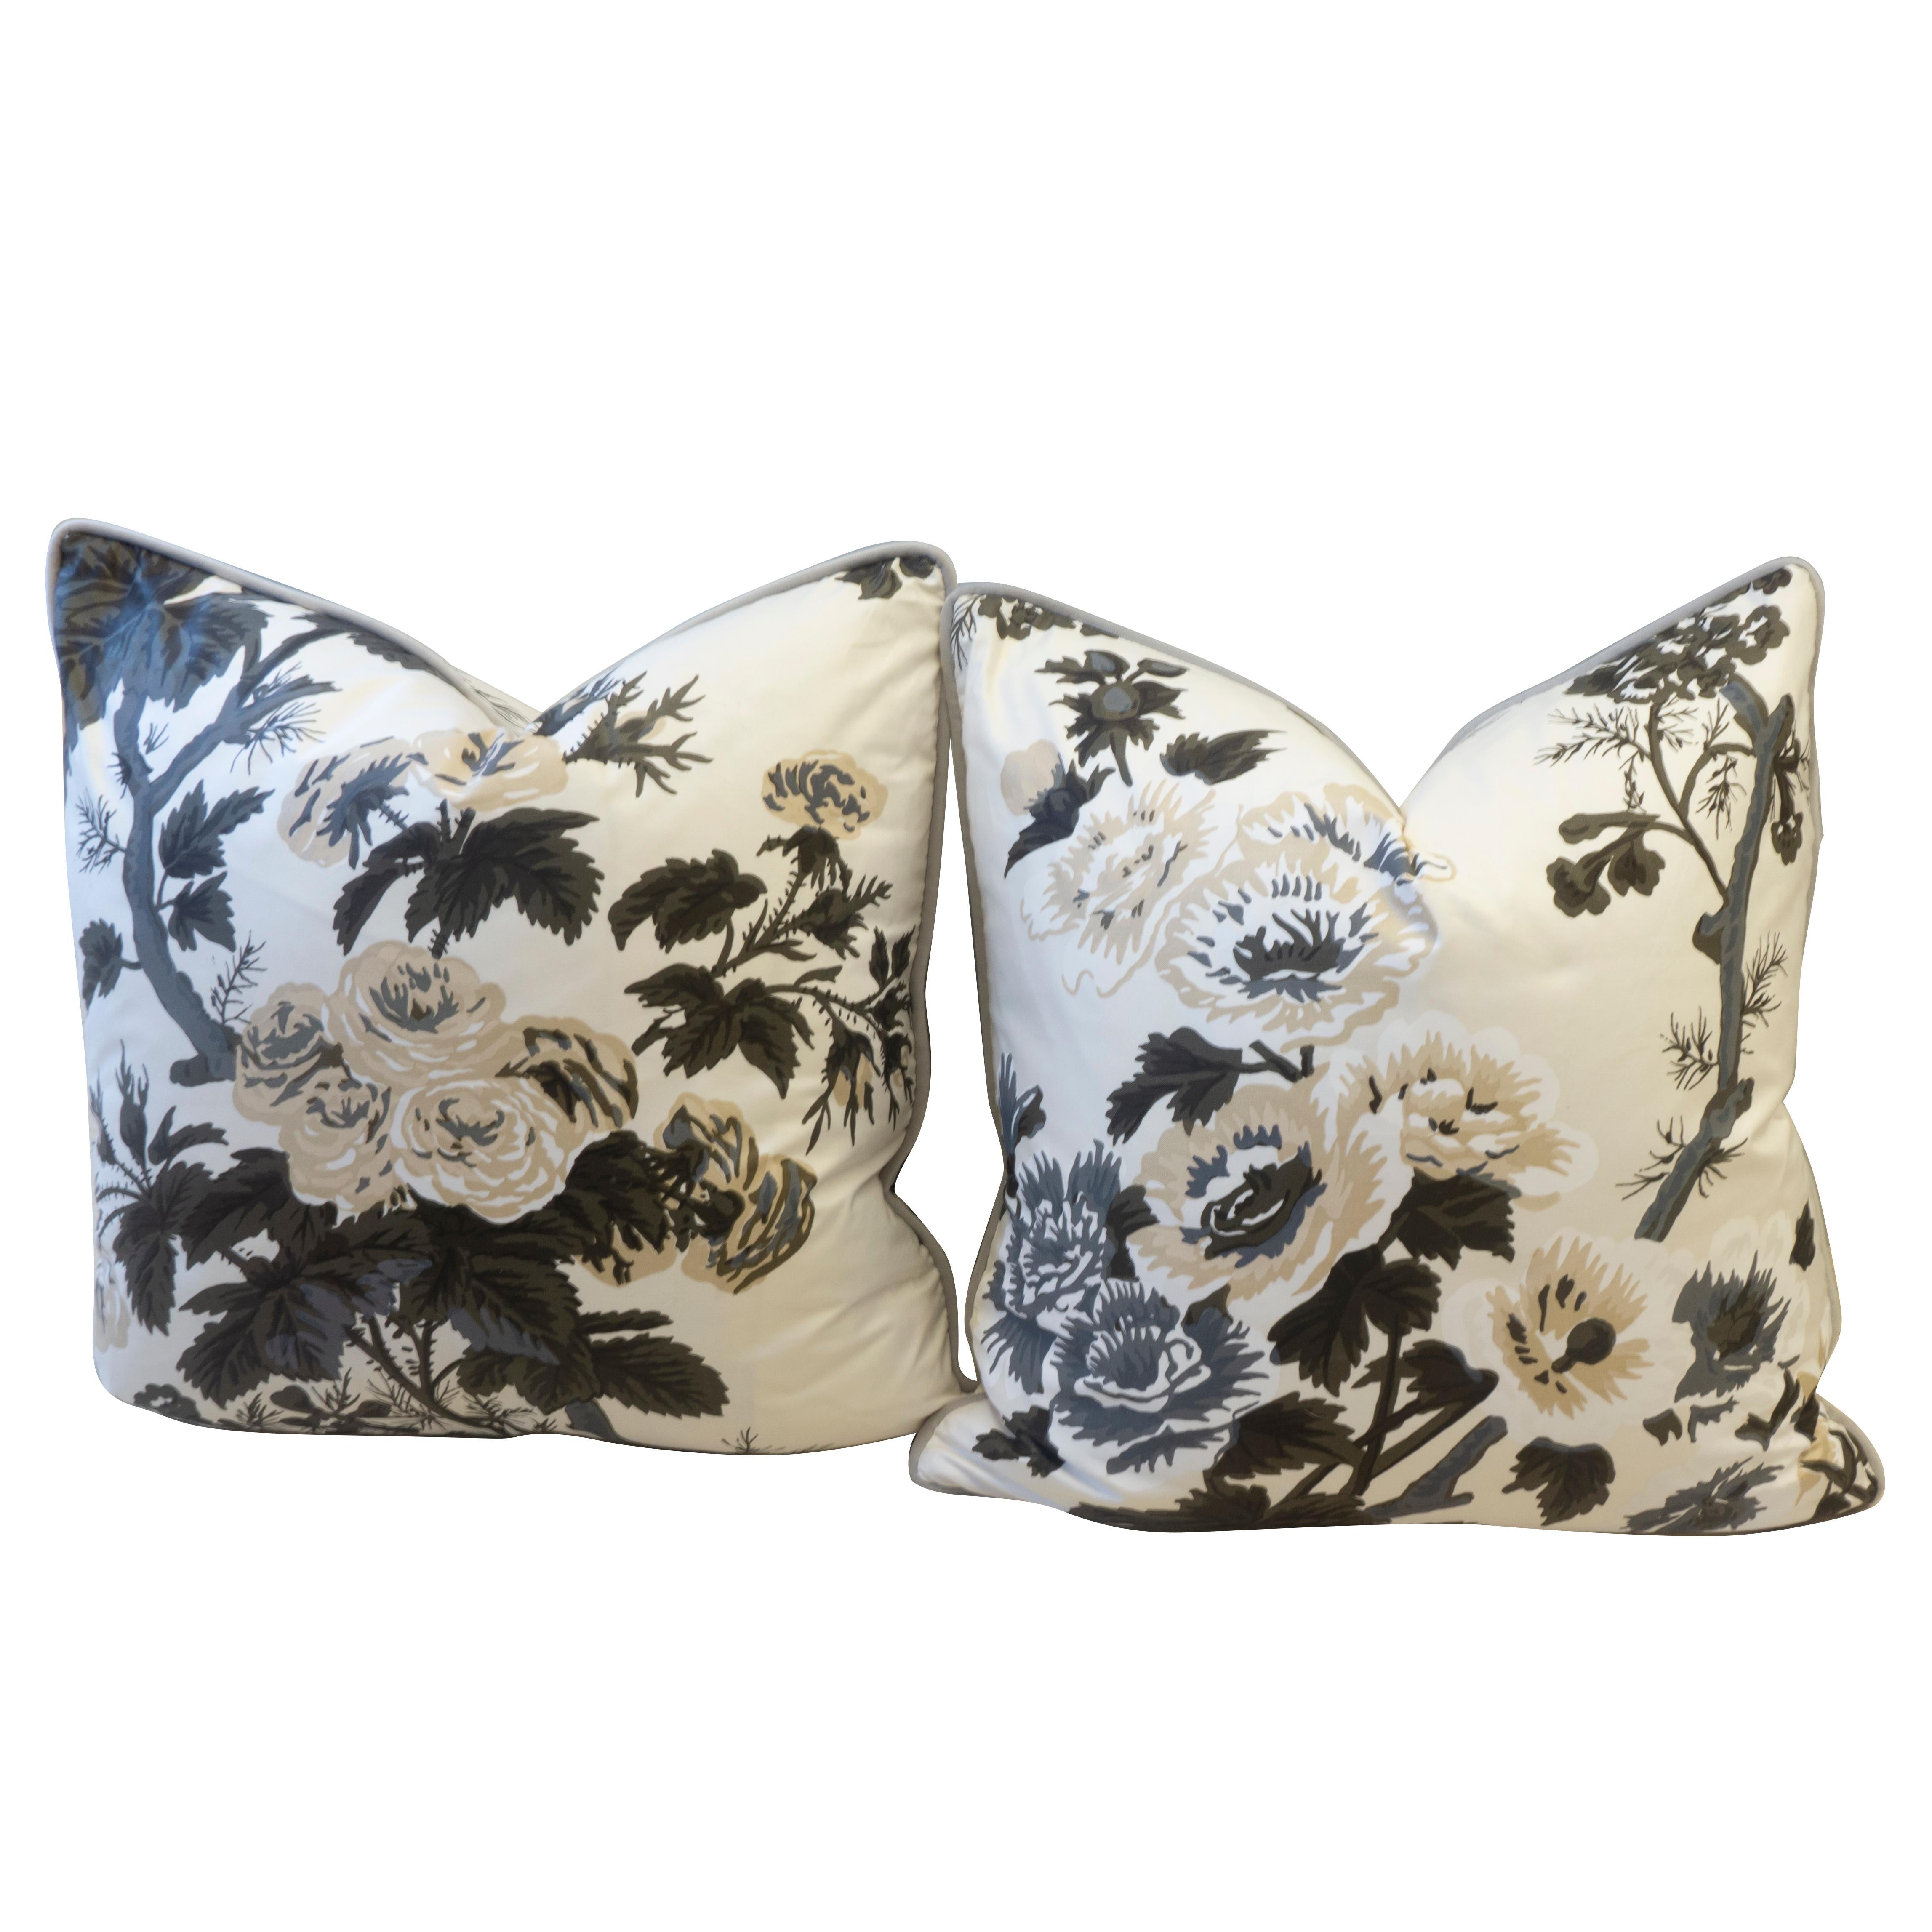 American Black and White Flower Pillows